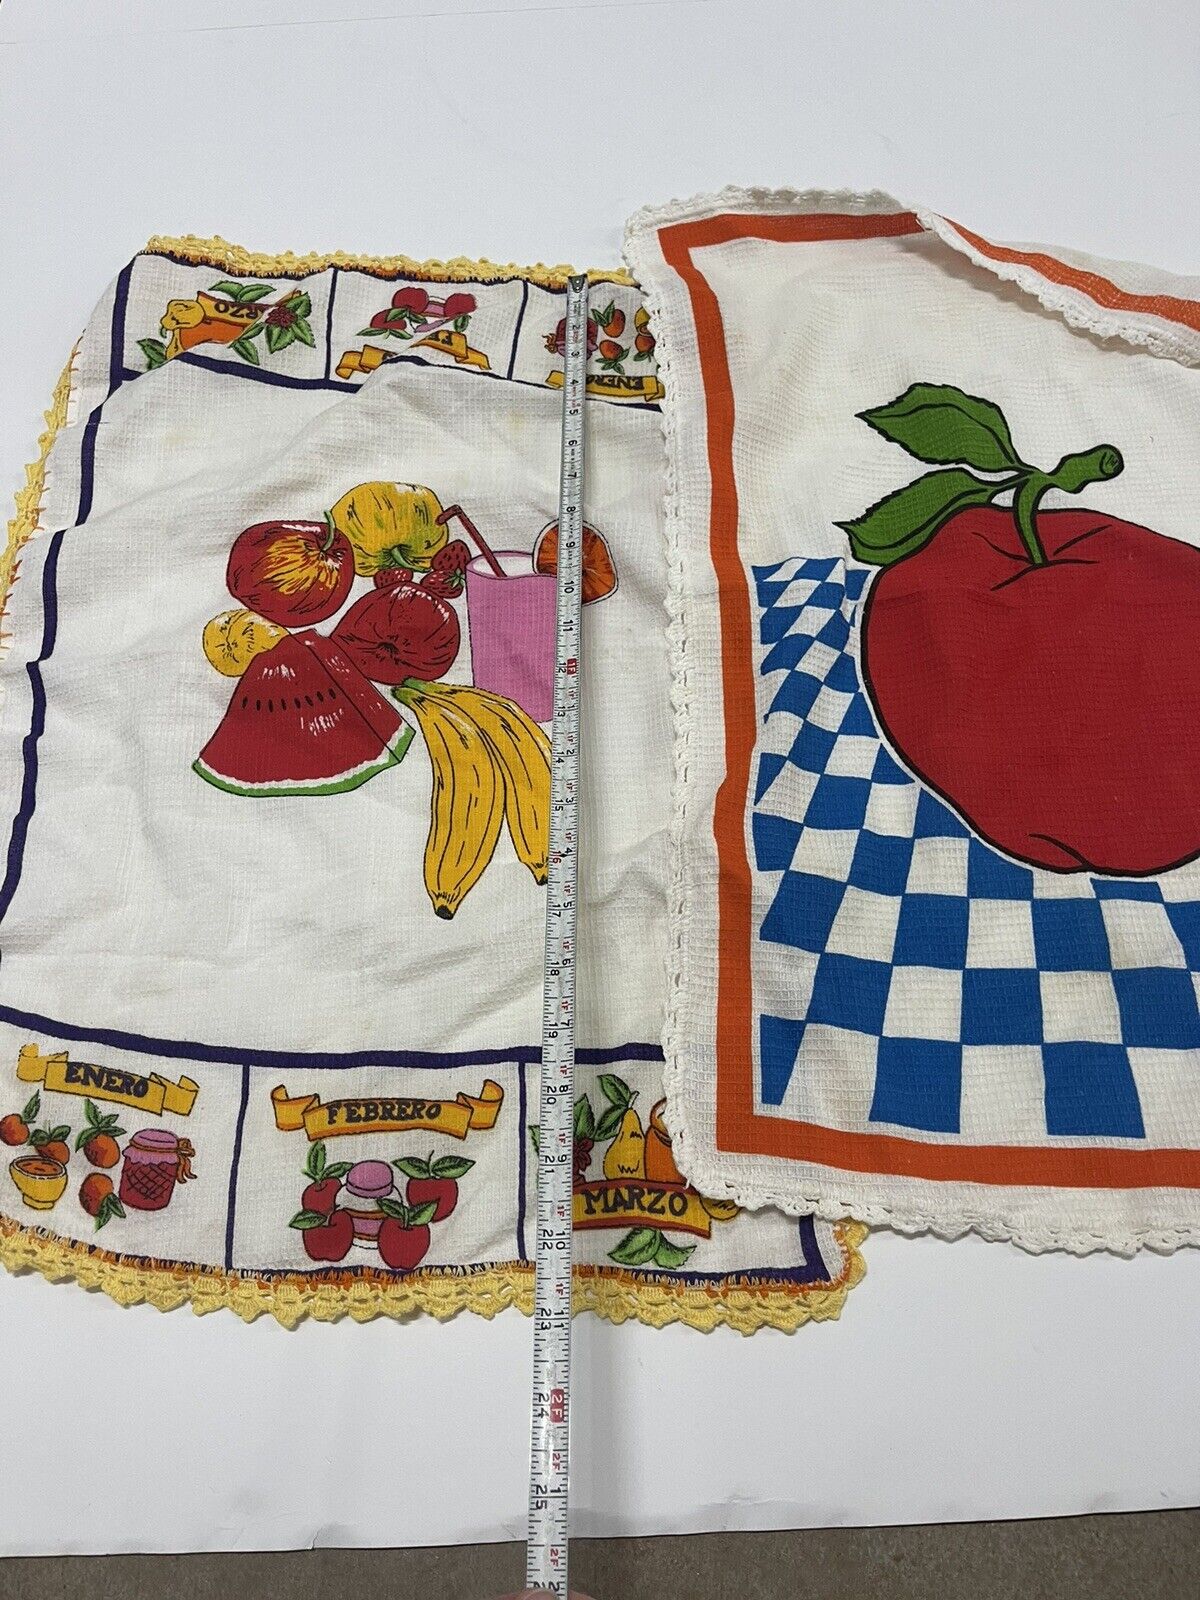 Vintage Fruit Embroidered Tea Towels days in Spanish Apples Bananas